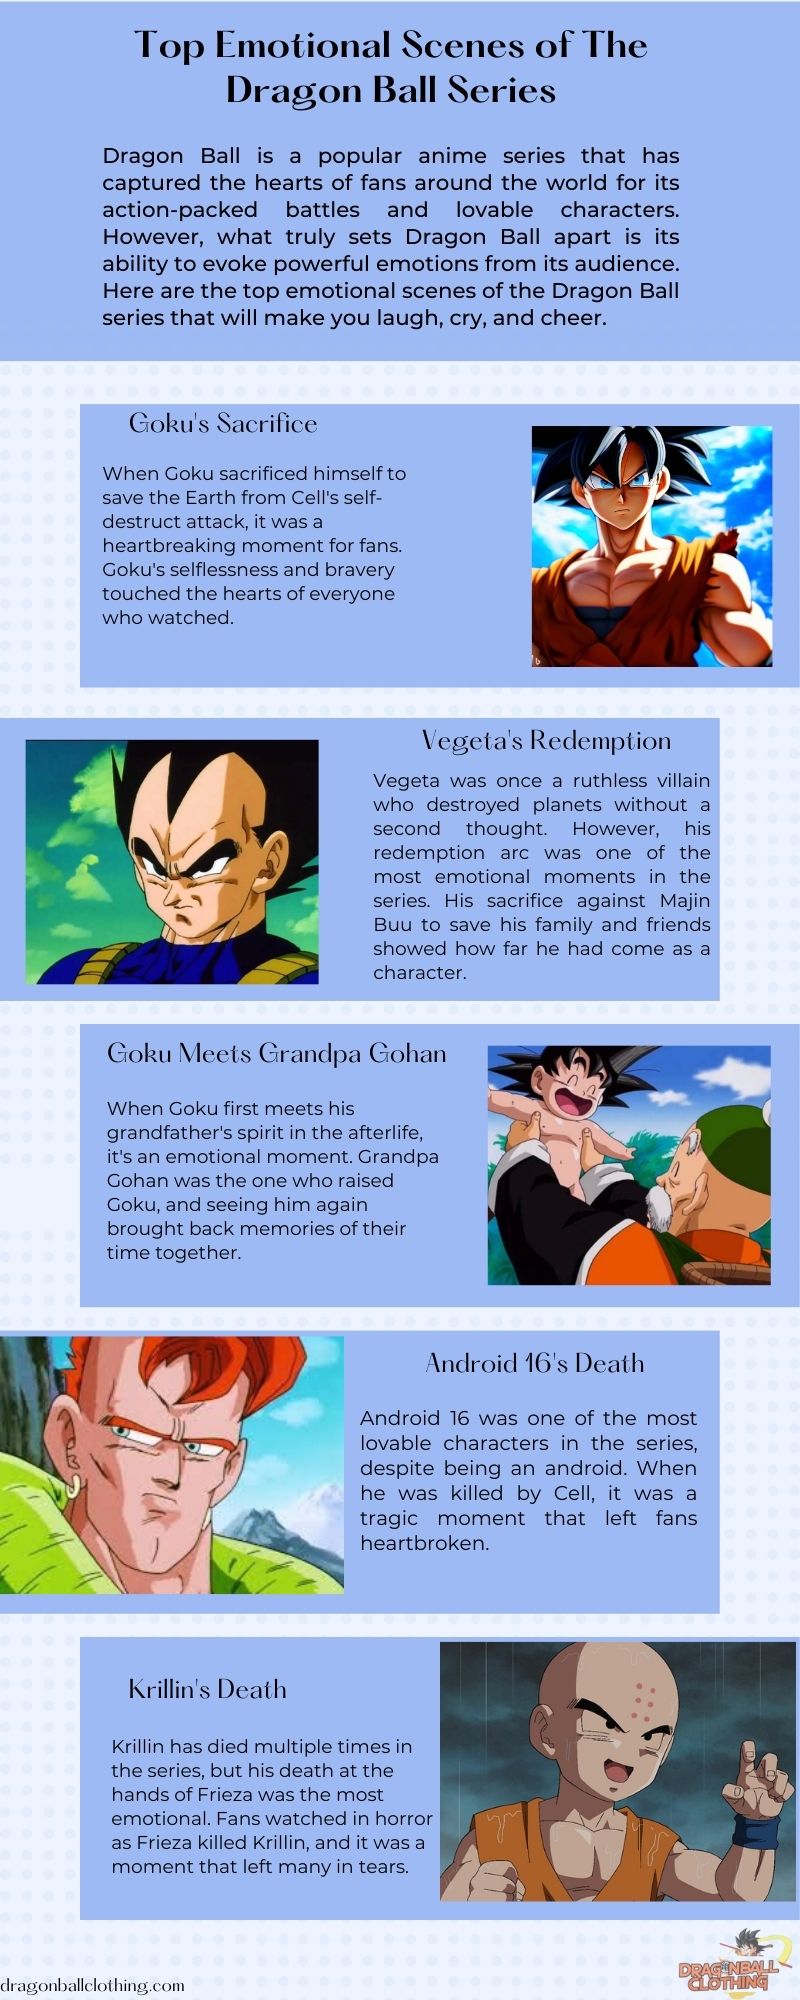 Top Emotional Scenes of The Dragon Ball Series